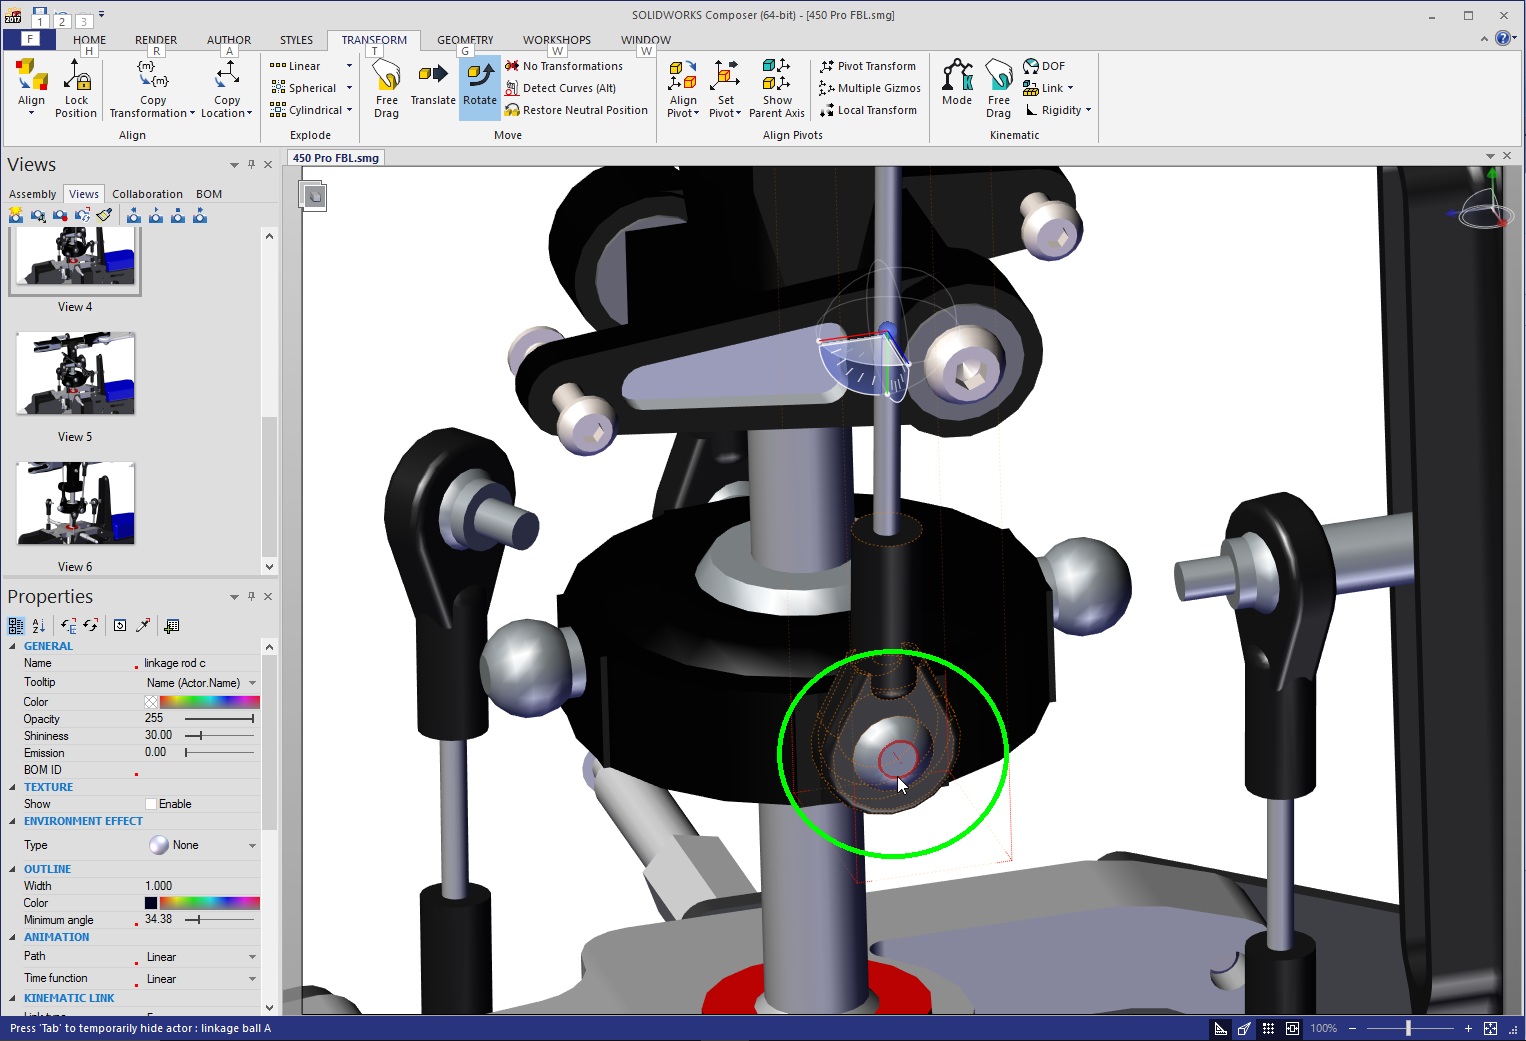 SOLIDWORKS